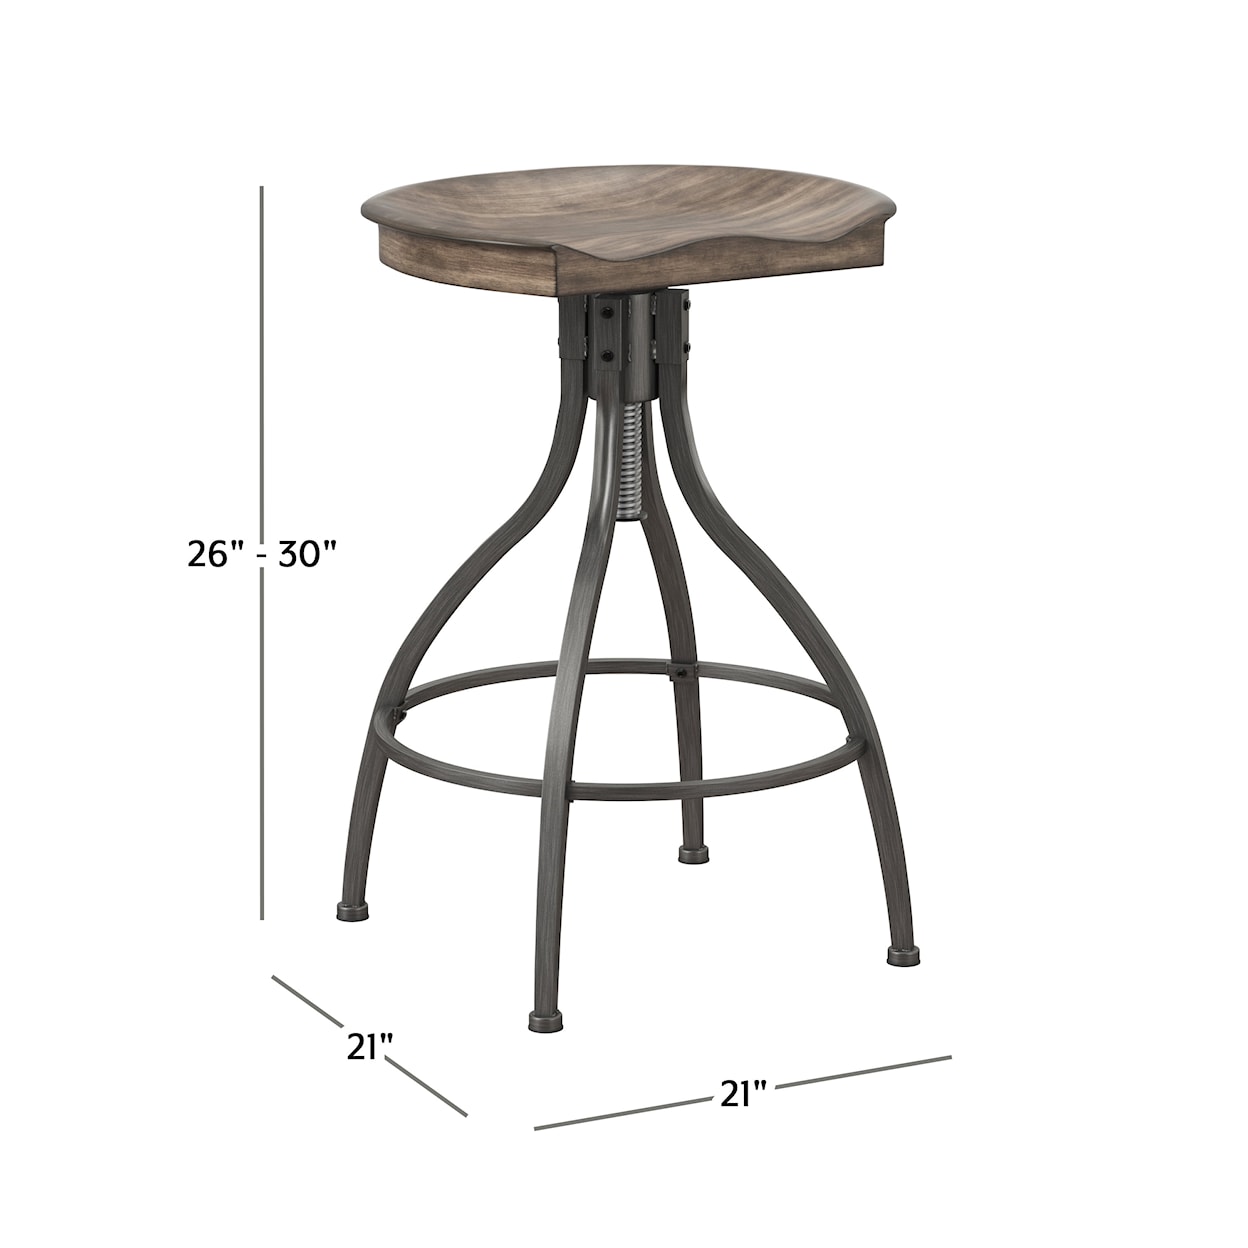 Hillsdale Worland Counter and Bar Stools